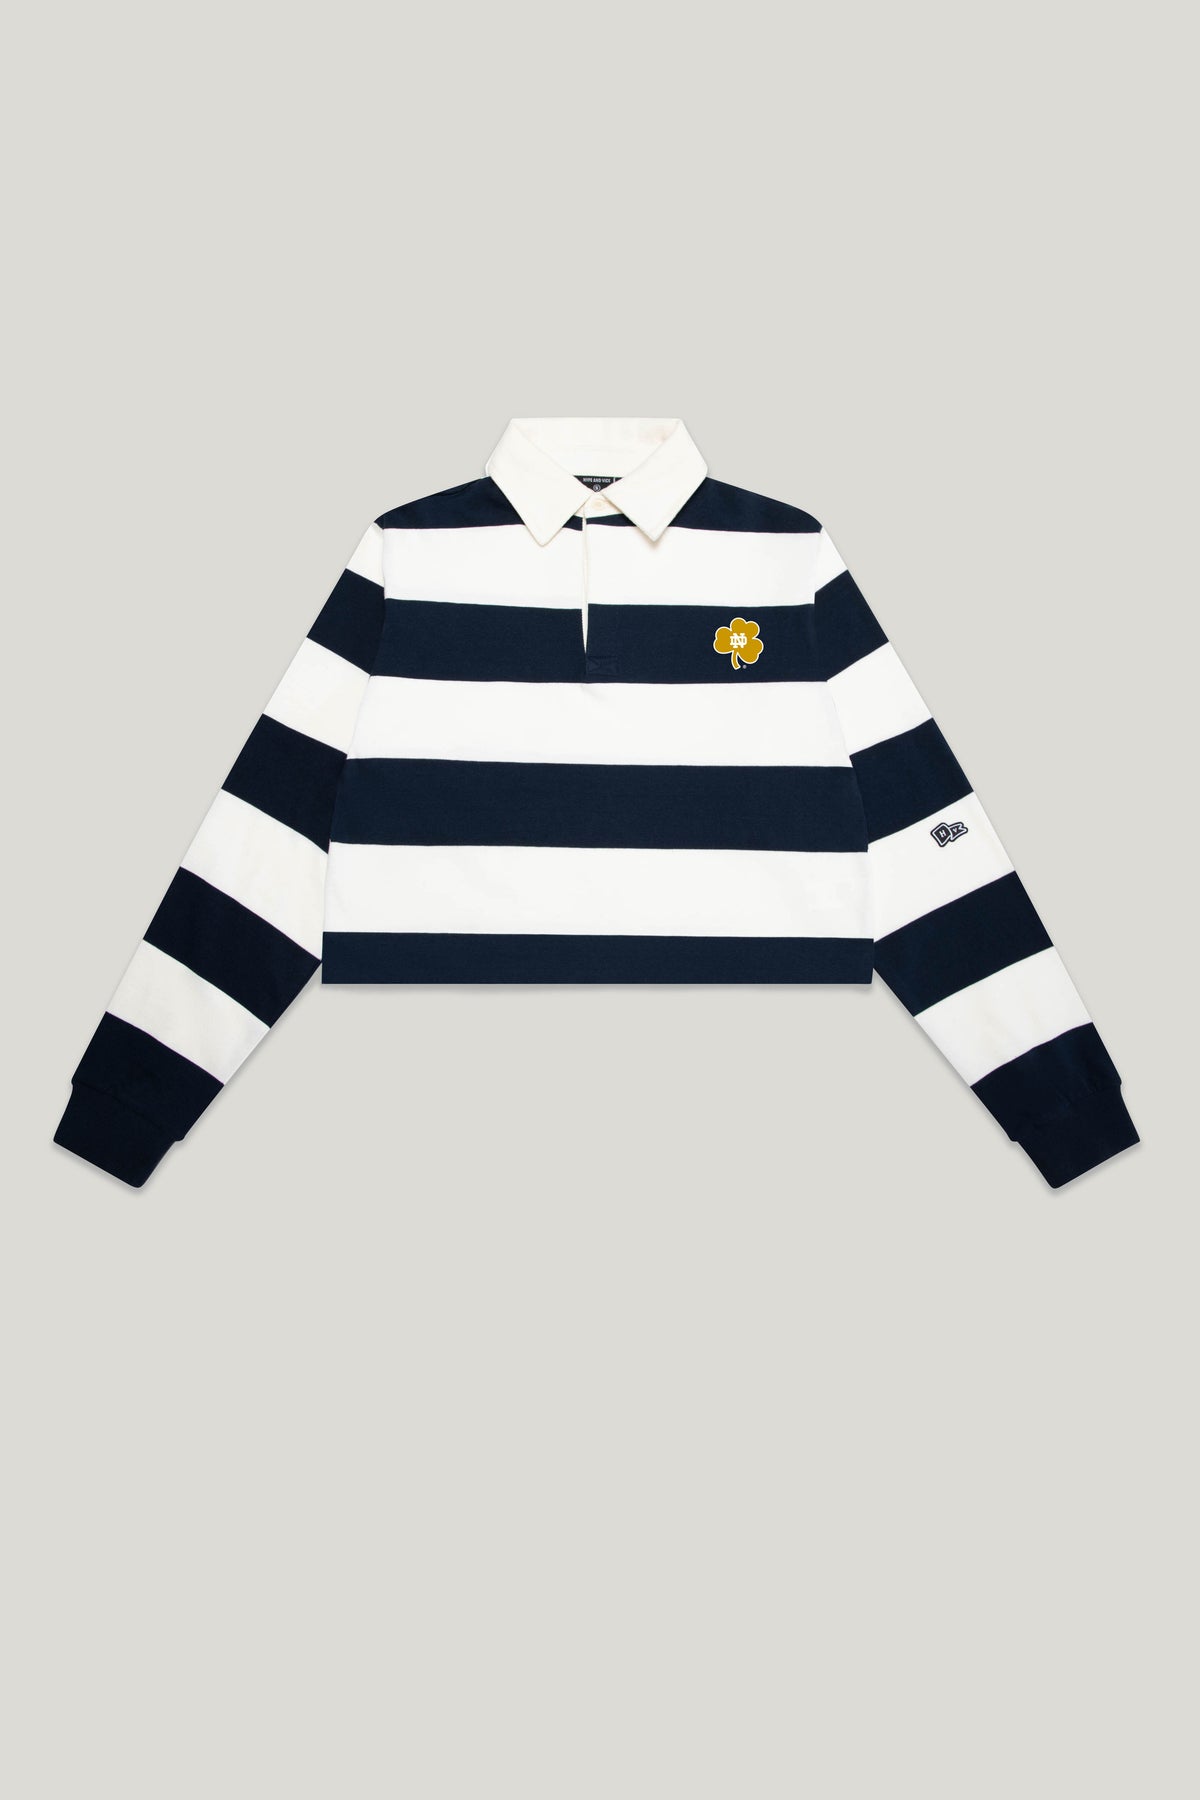 Notre Dame Rugby Top